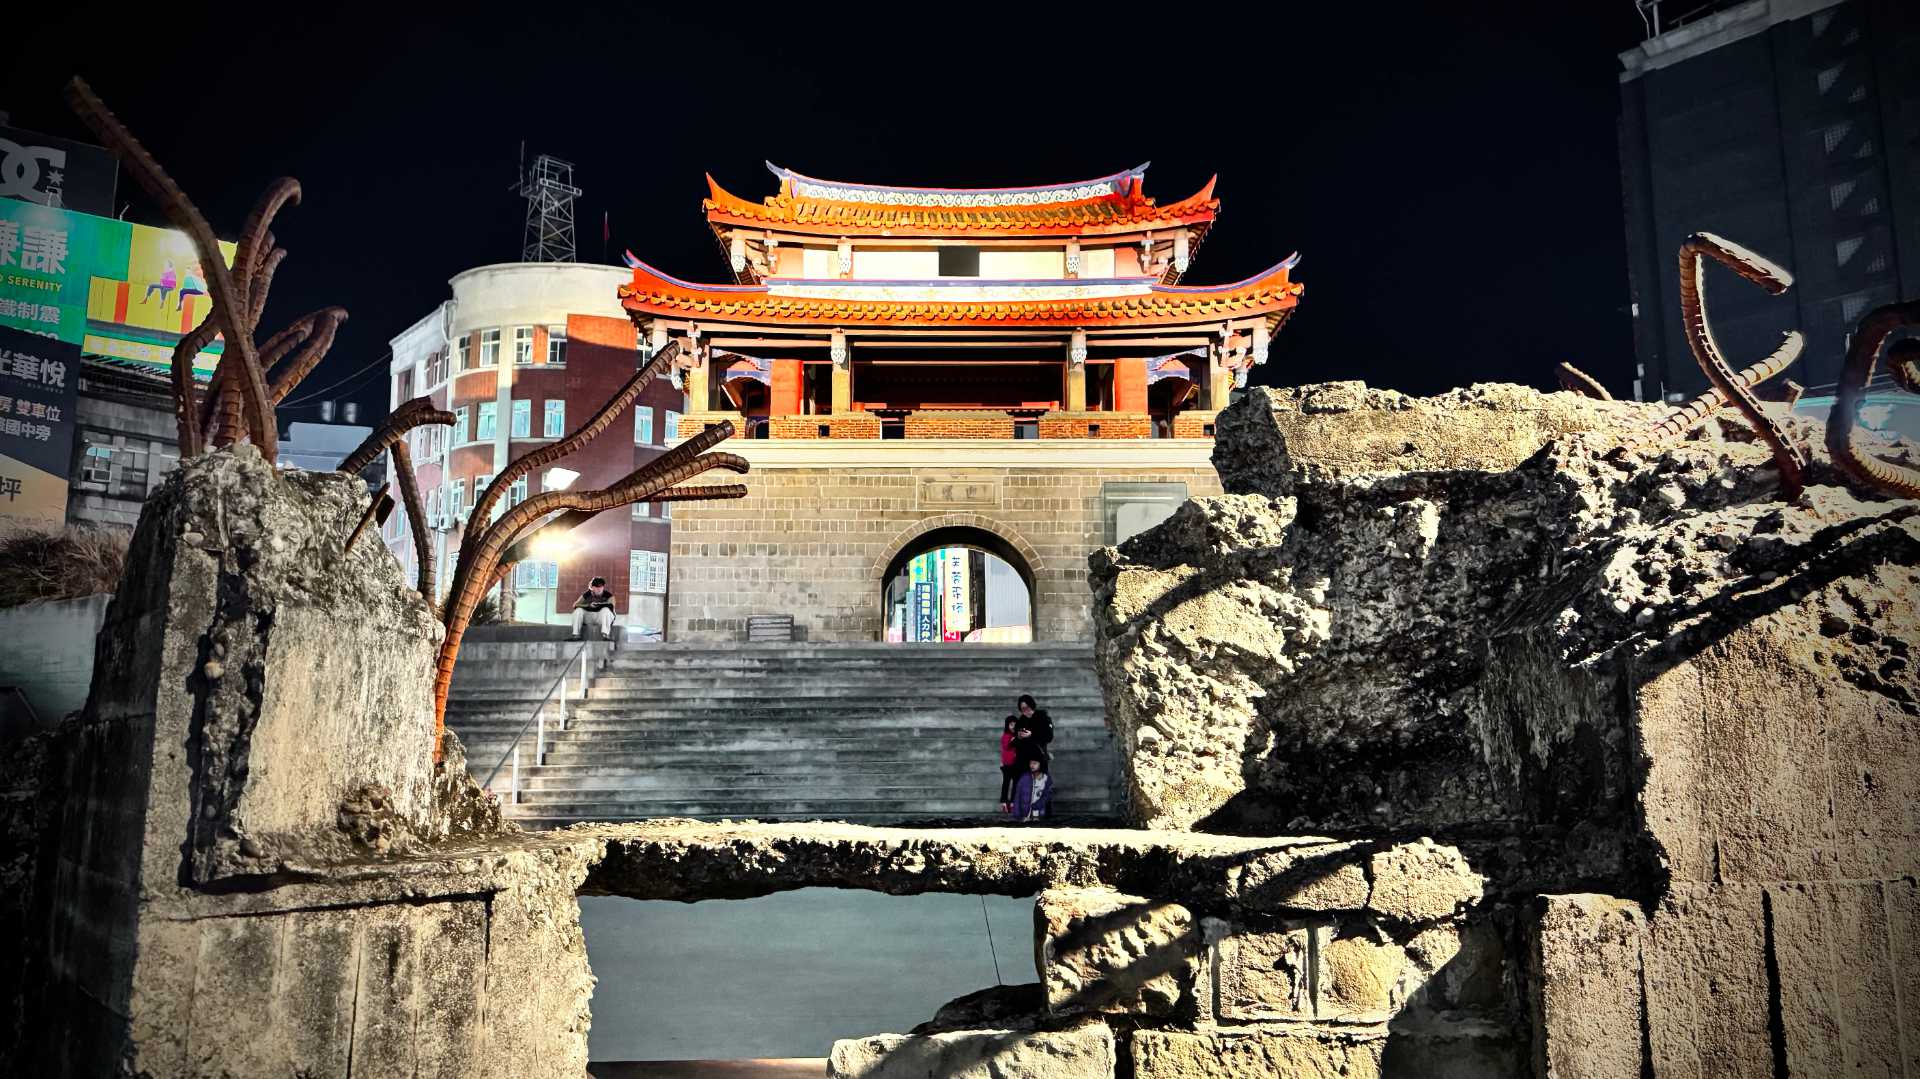 Night-time photo of Yieng-Siyi Gate in Hsinchu, a historic Qing Dynasty-era city gate, viewed through the ruins of a reinforced-concrete wall in the foreground.